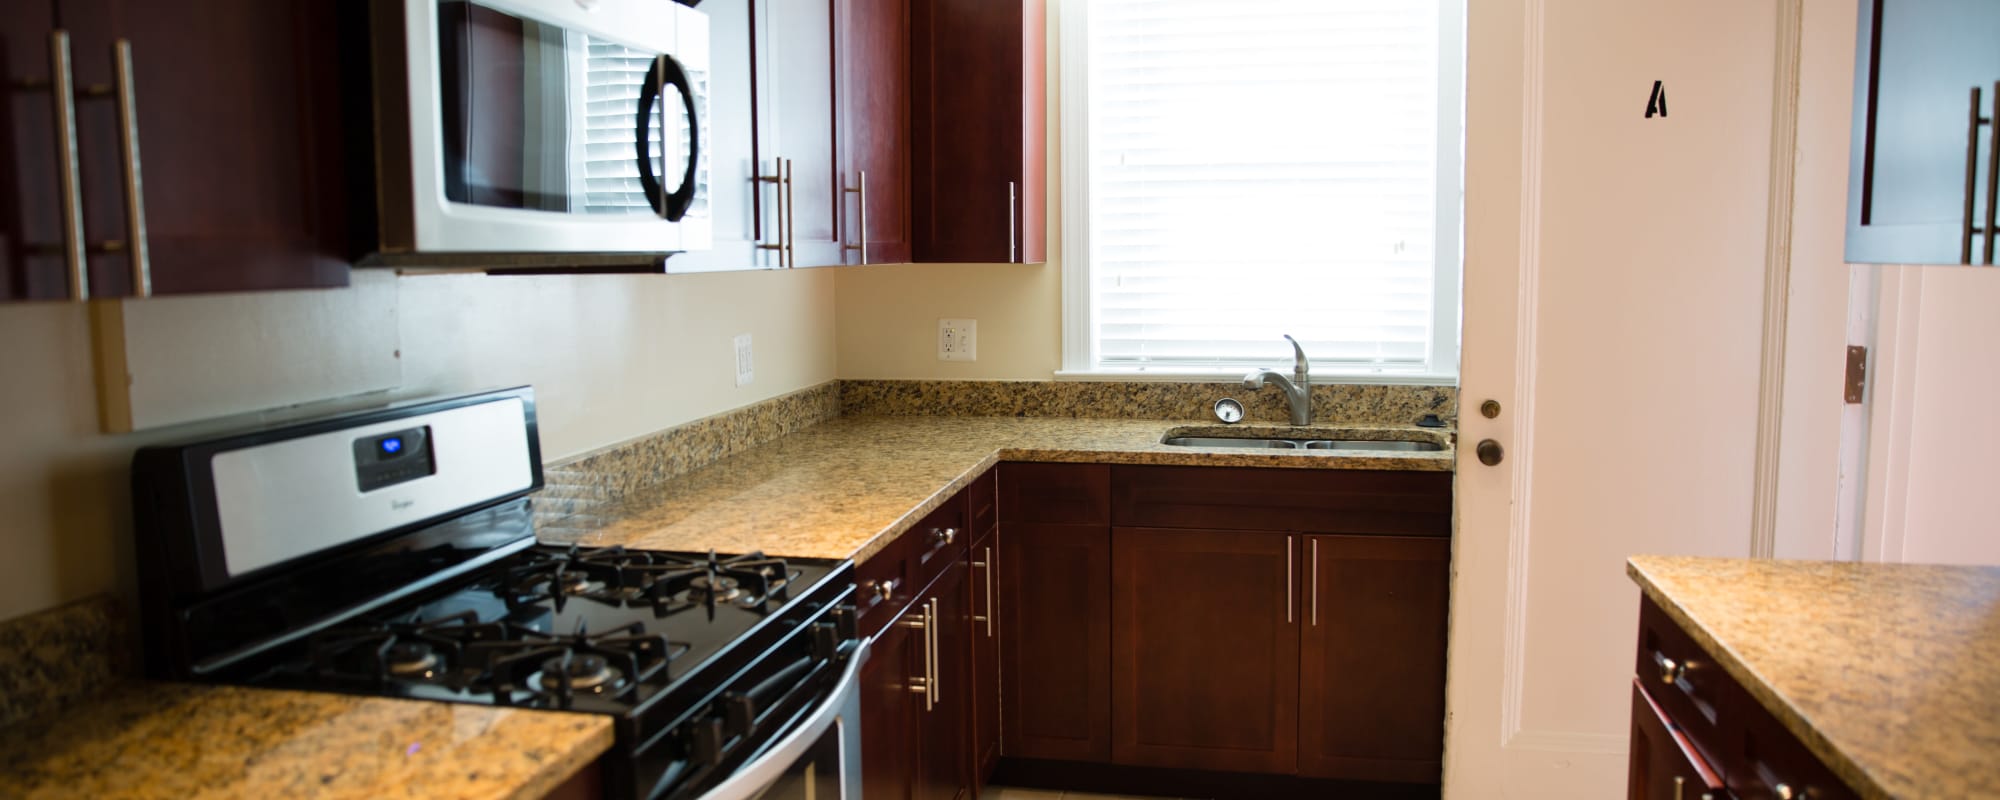 the kitchen at Perry Circle Apartments in Annapolis, Maryland